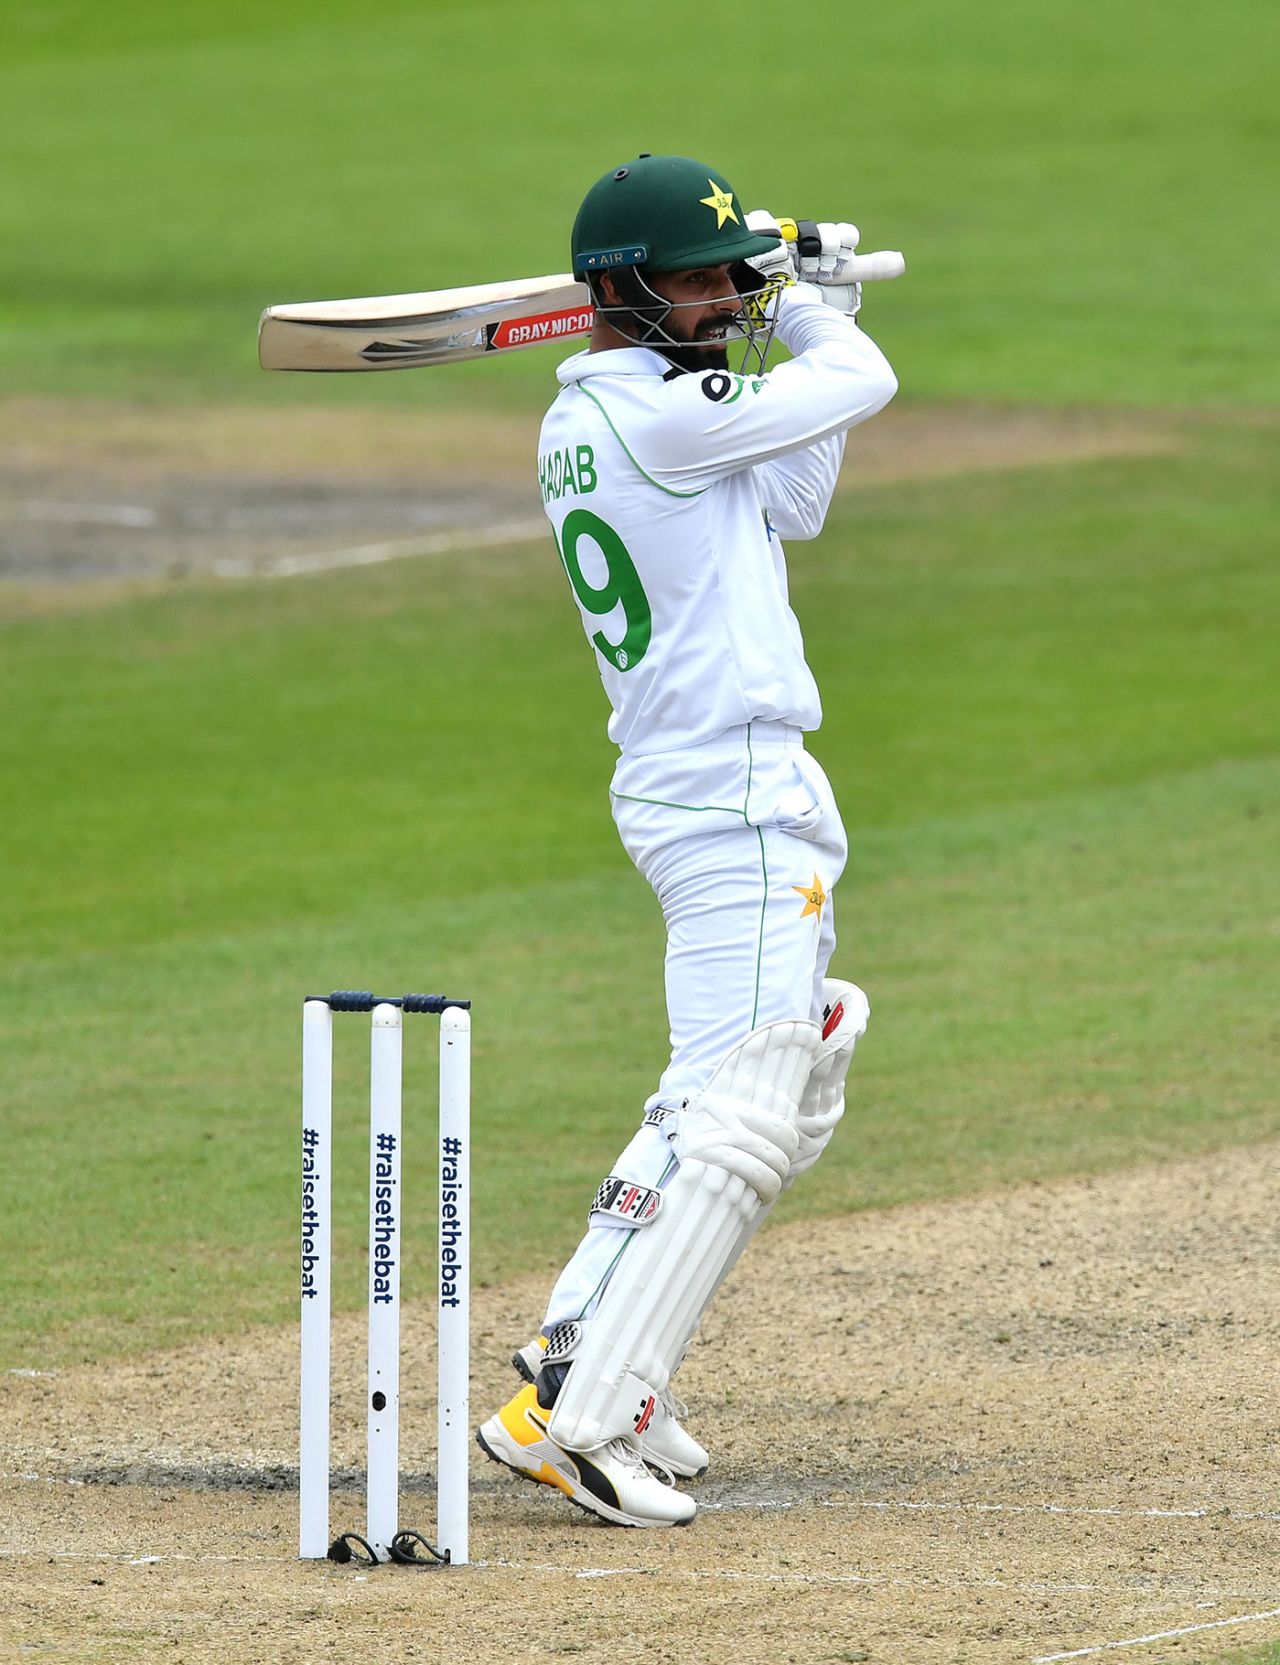 Shadab Khan cuts through the off side, England v Pakistan, 1st Test, Old Trafford, 2nd day, August 6, 2020